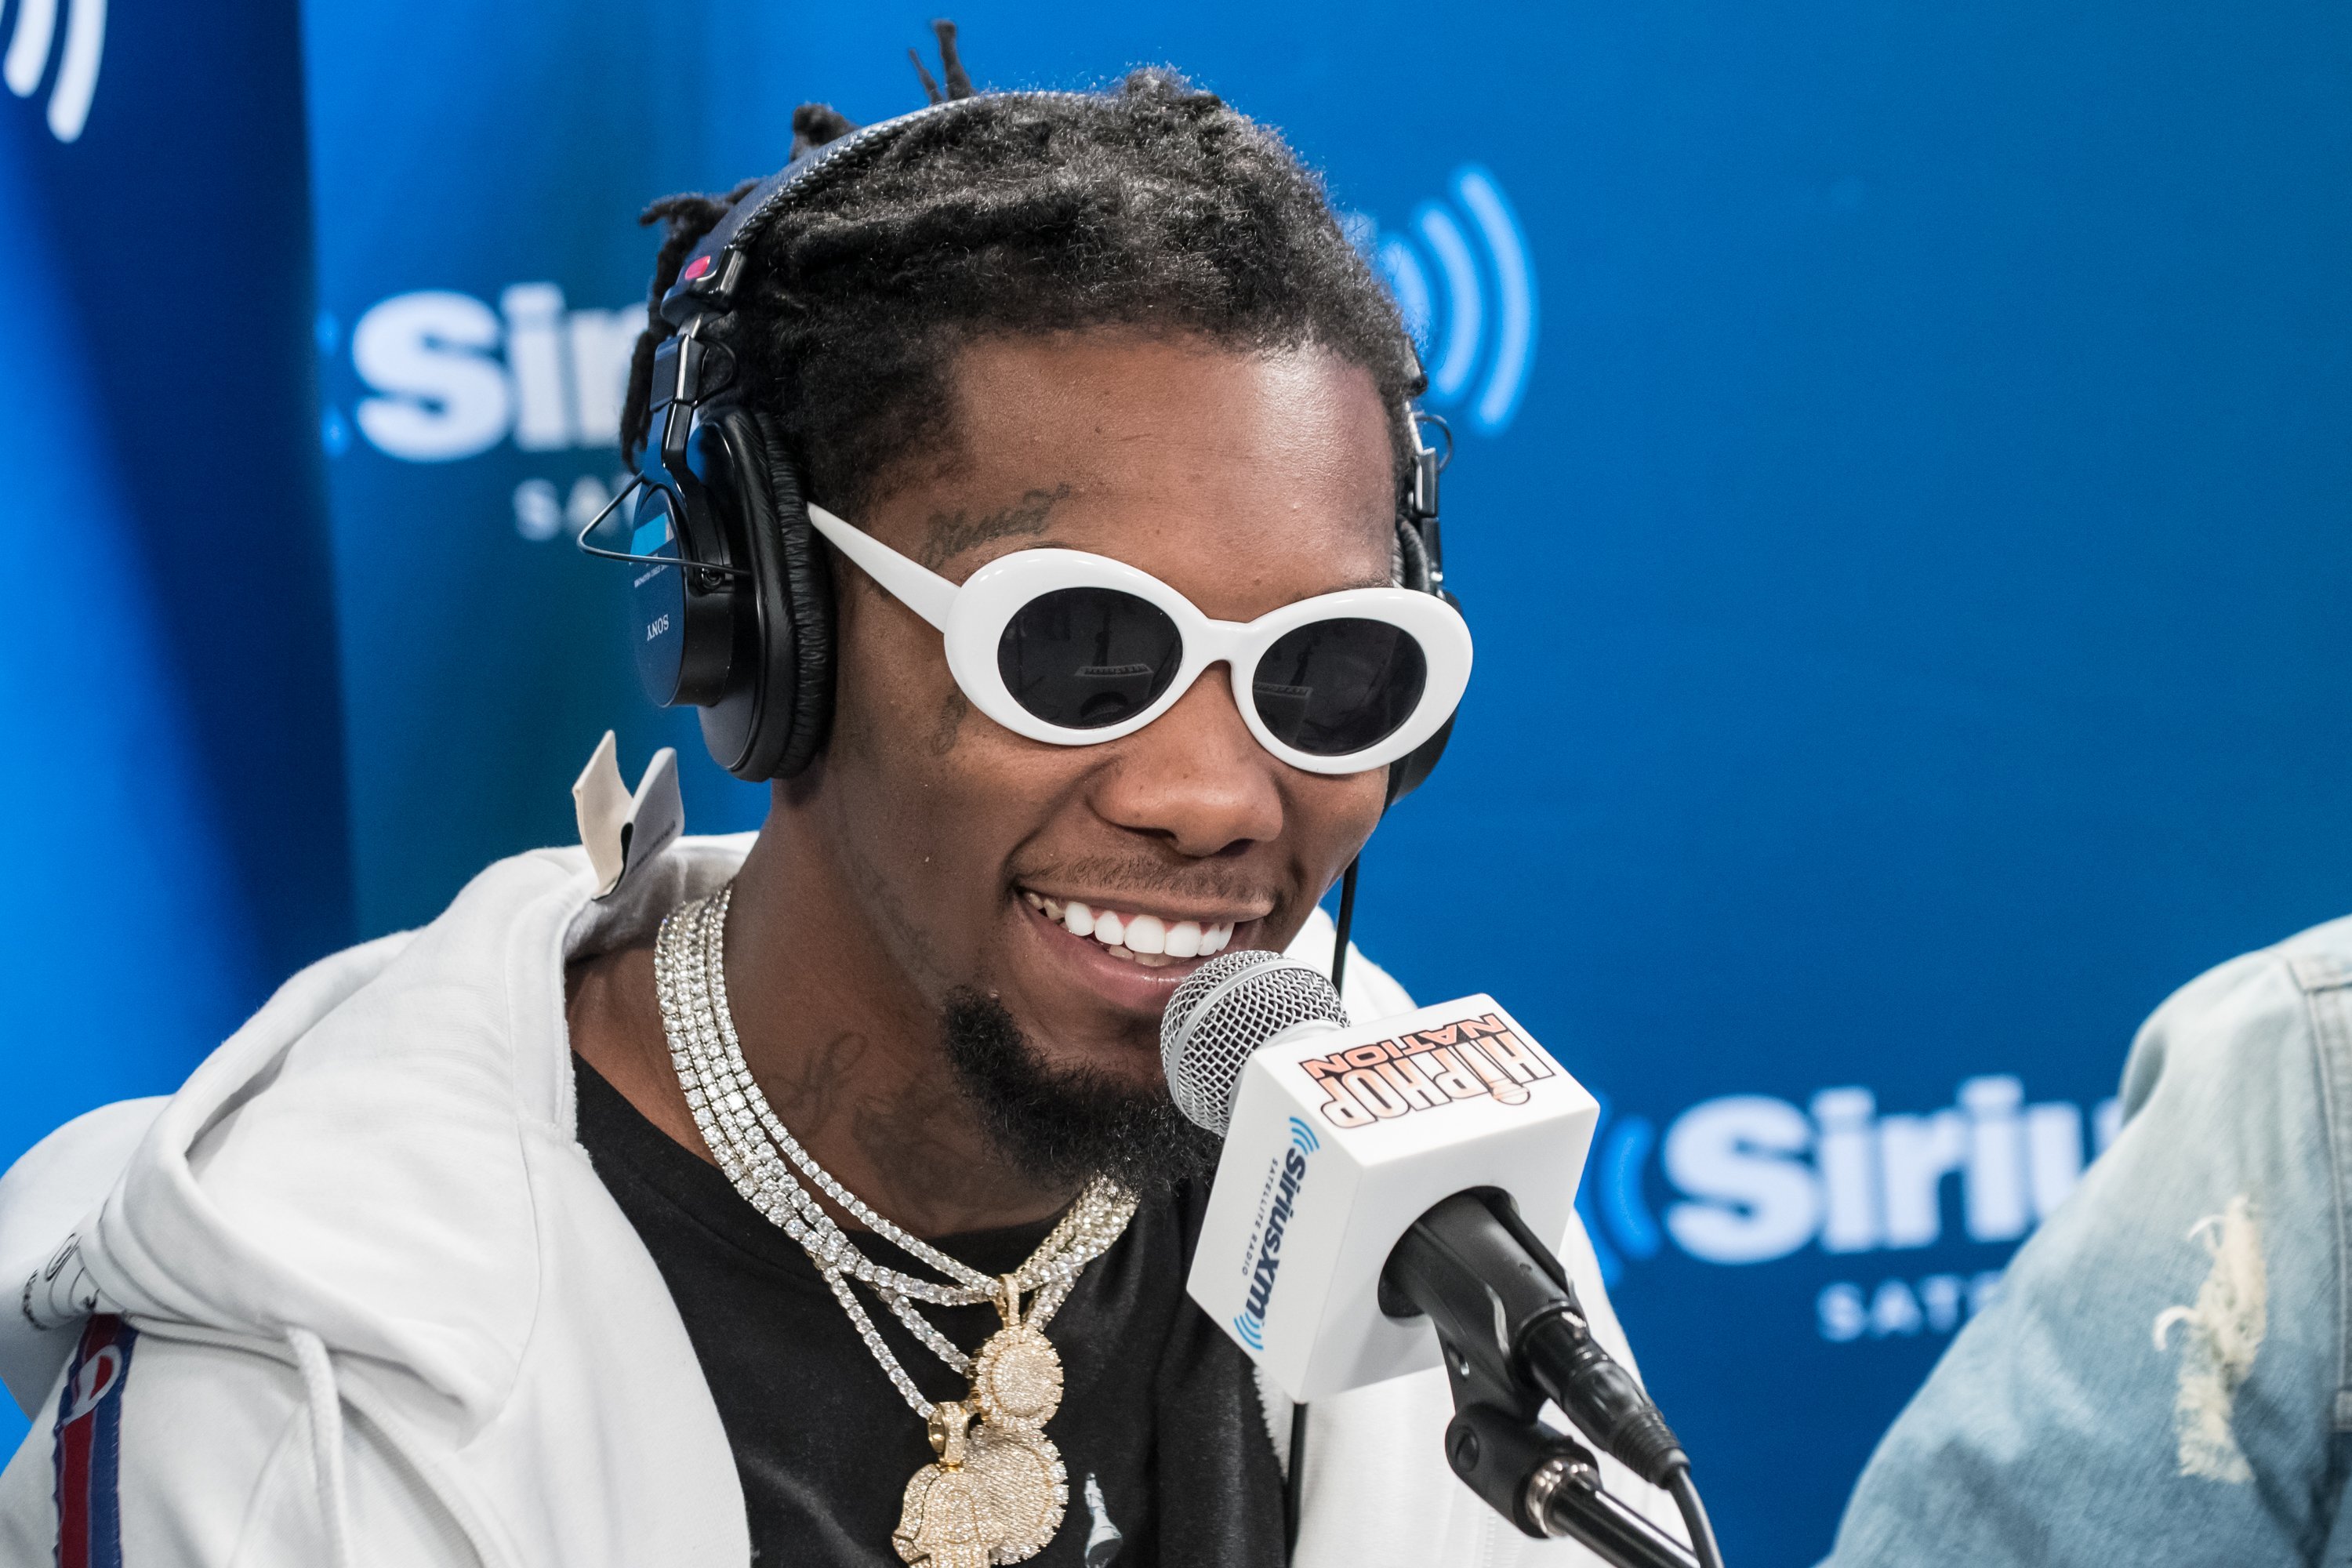 Migos Rapper Offset visits SiriusXM Studios on January 26, 2017. | Photo: GettyImages